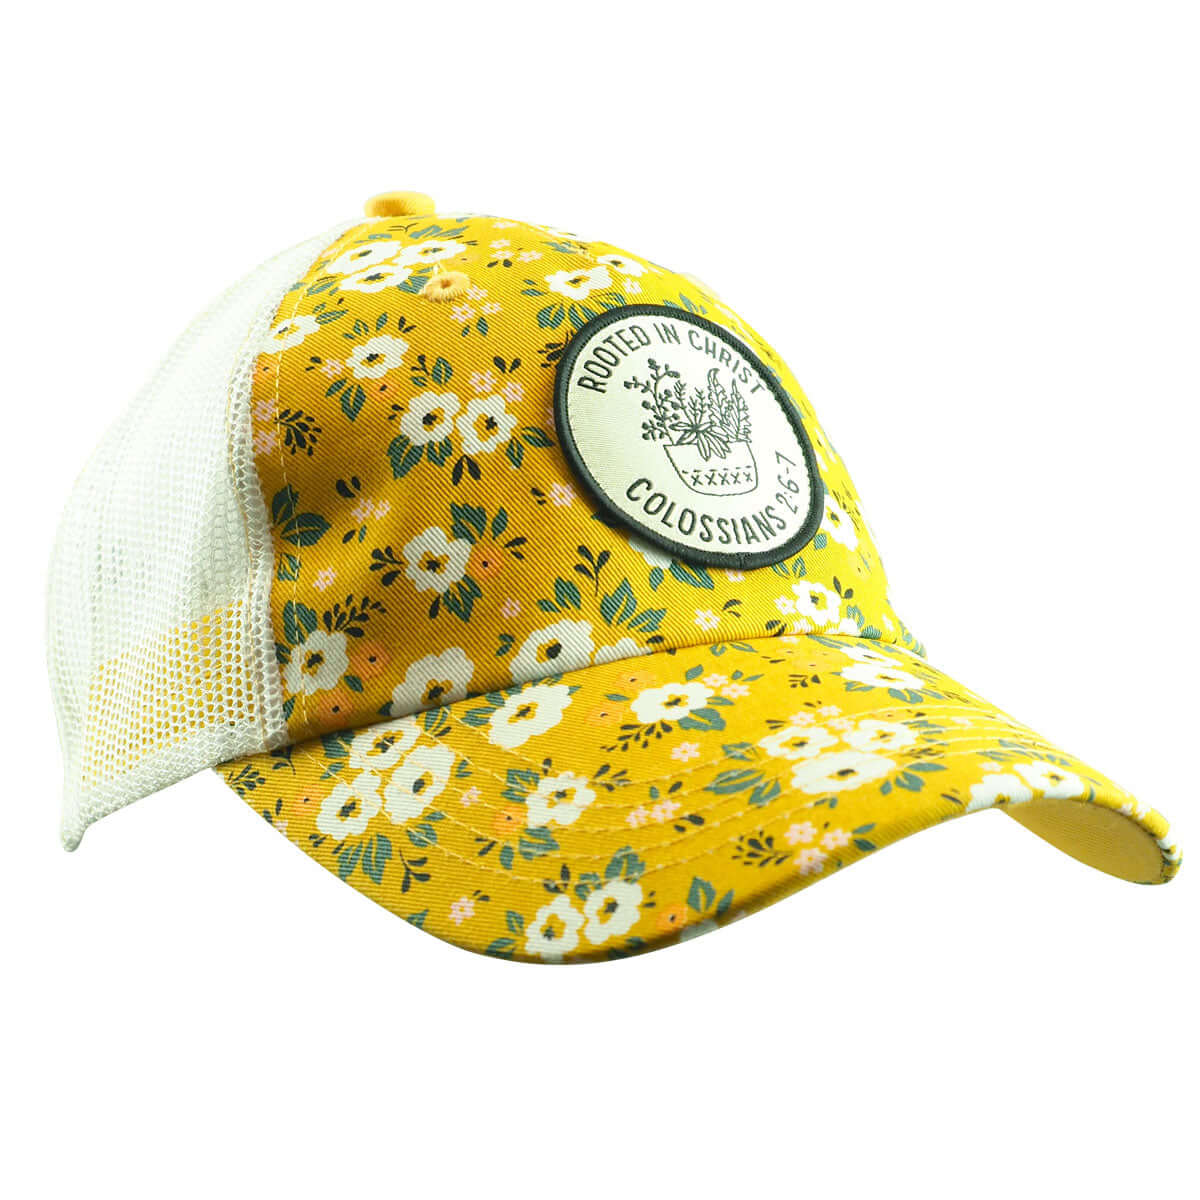 Cherished Girl Rooted In Christ Womens Cap | 2FruitBearers